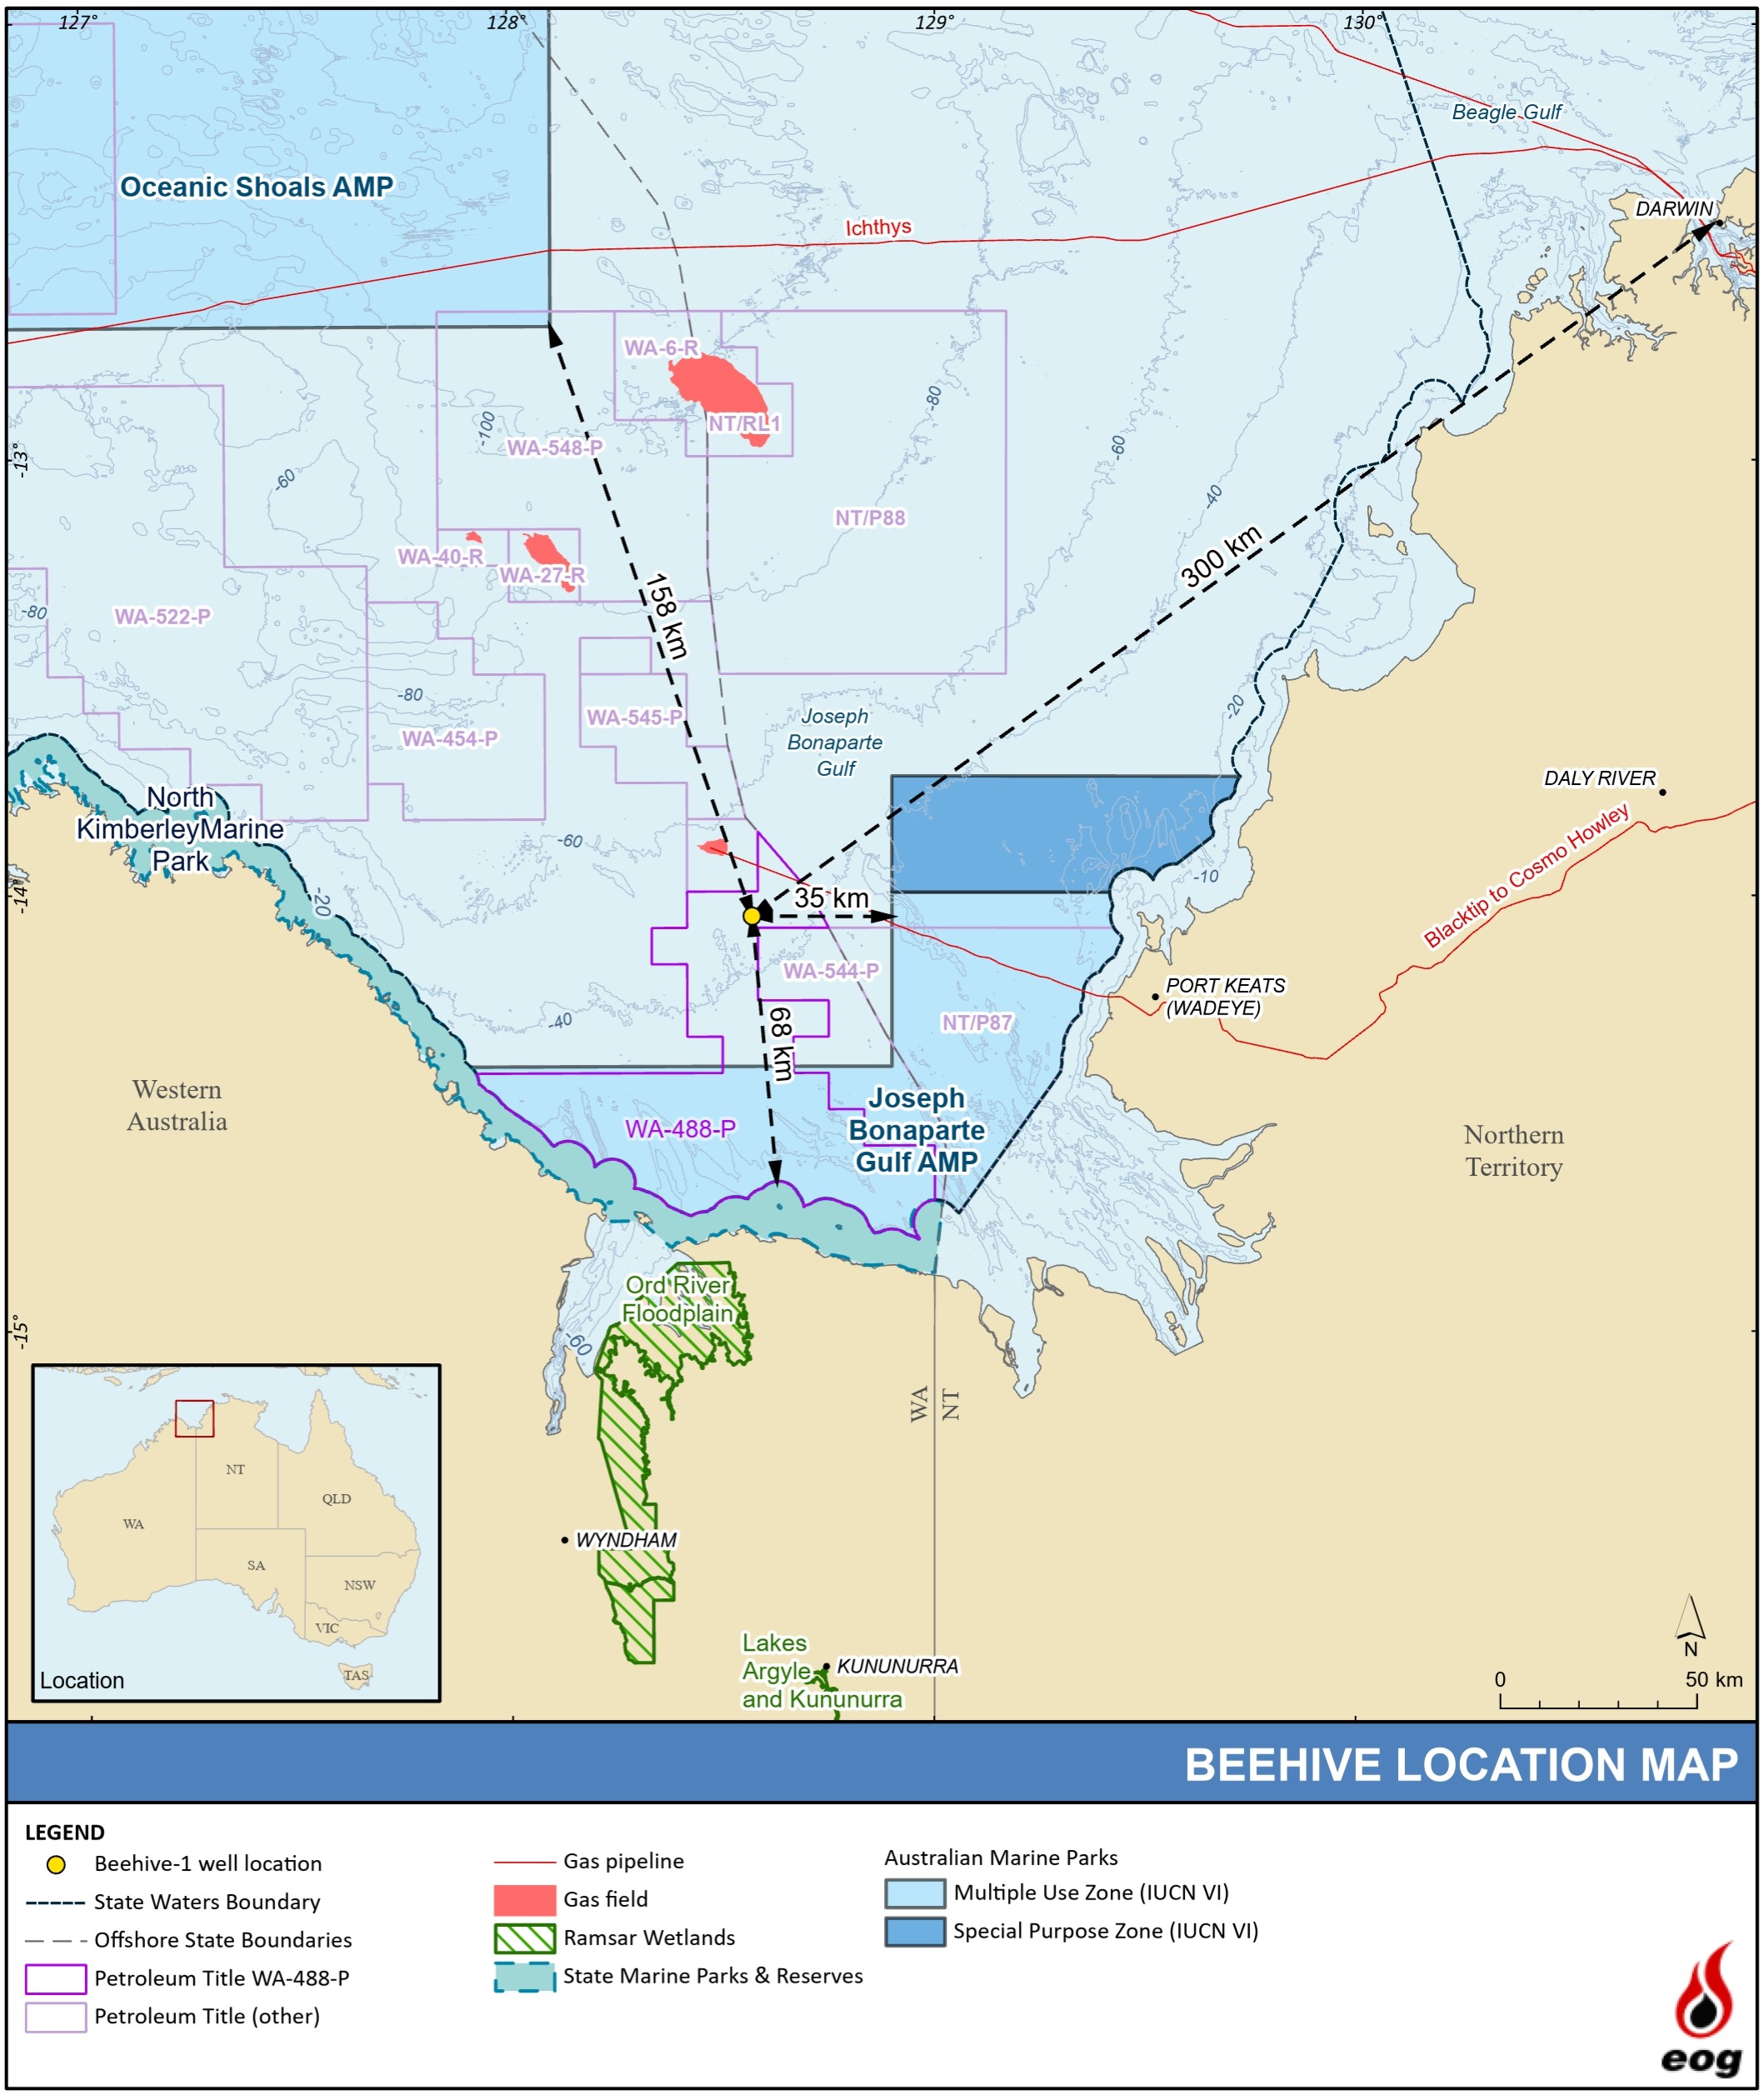 Location map - Activity: Beehive-1 Exploration Drilling WA-488-P (refer to description)